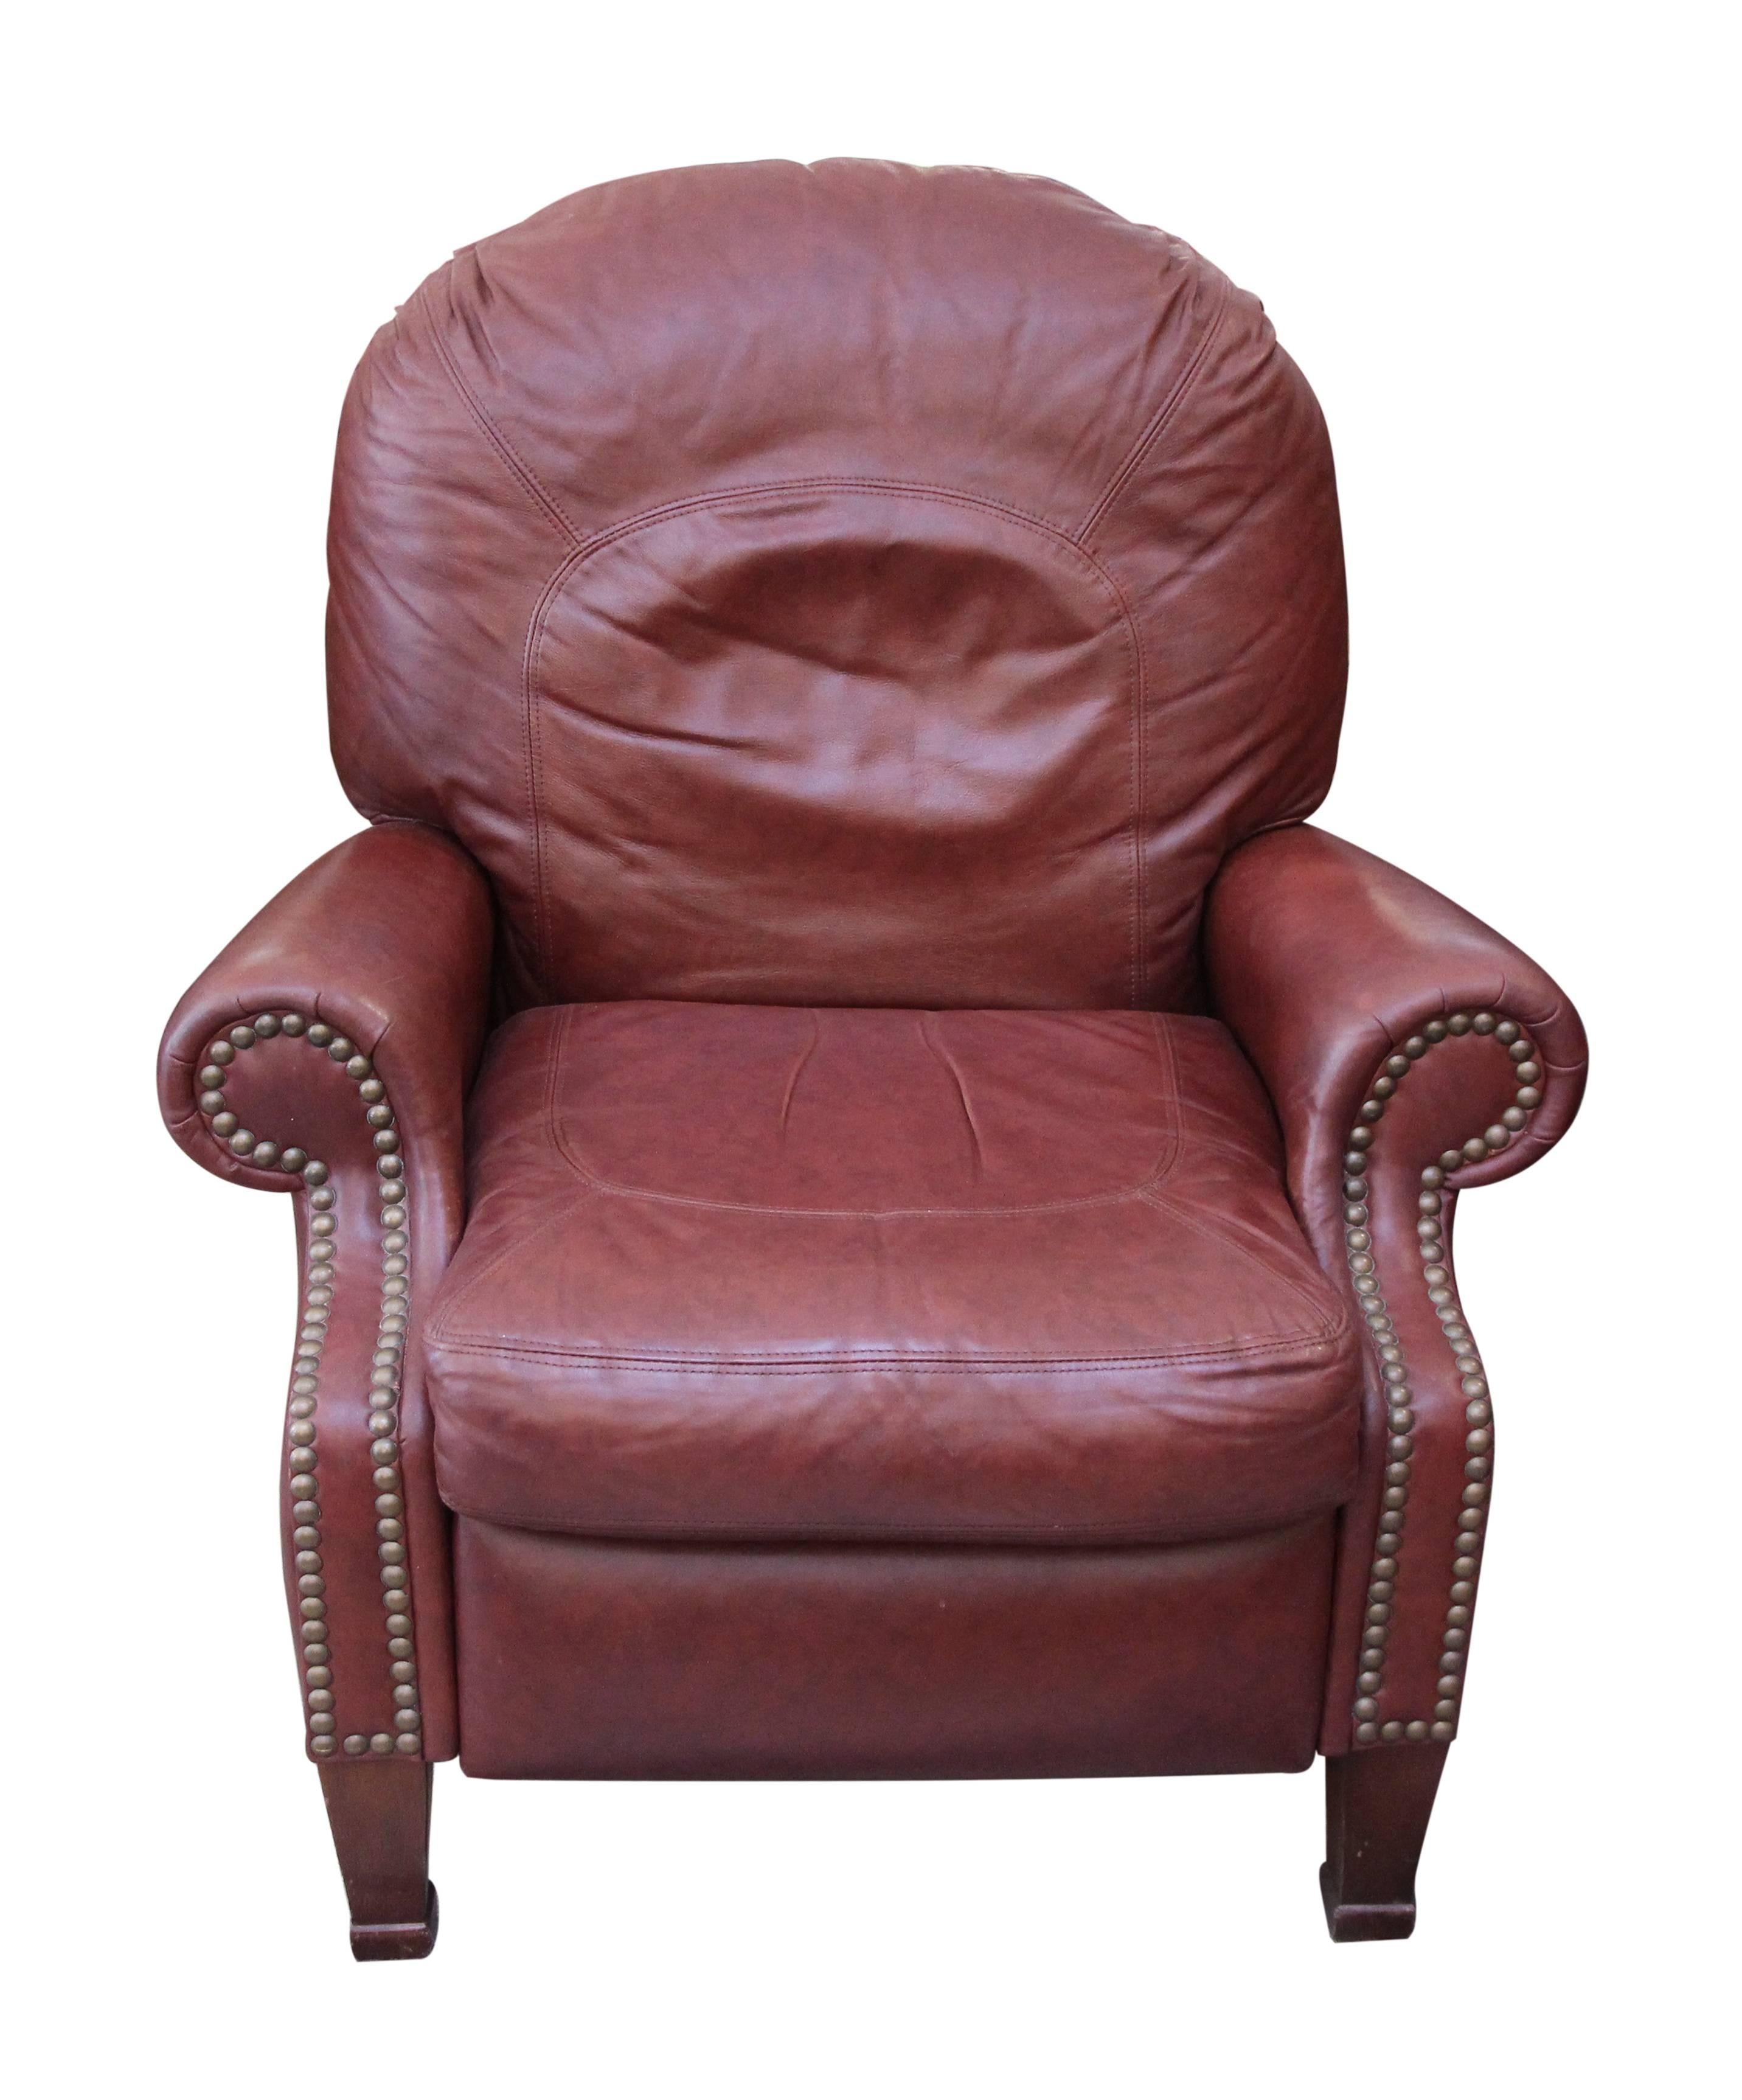 2000s pair of burgundy leather reclining chairs made by Bradington Young. This item can be viewed at our 5 East 16th St, Union Square location in Manhattan.